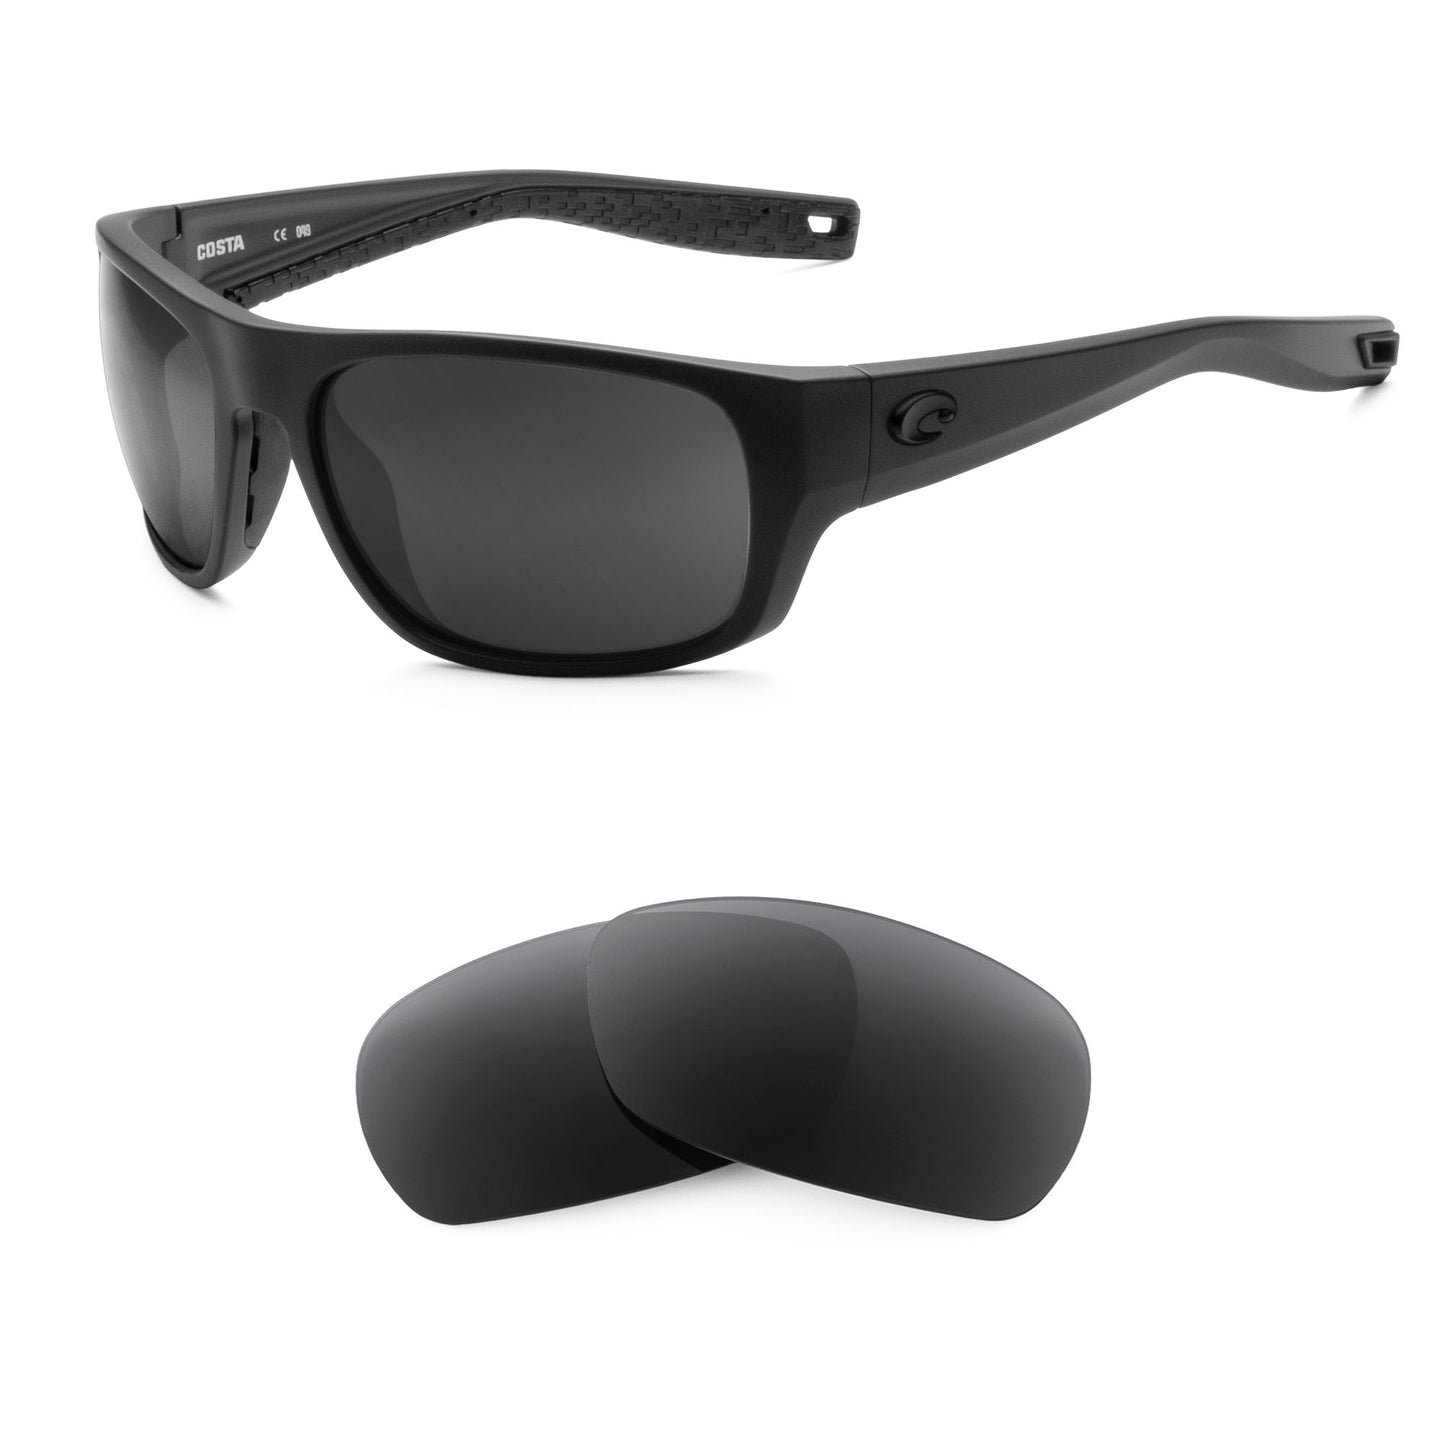 Costa Tico sunglasses with replacement lenses